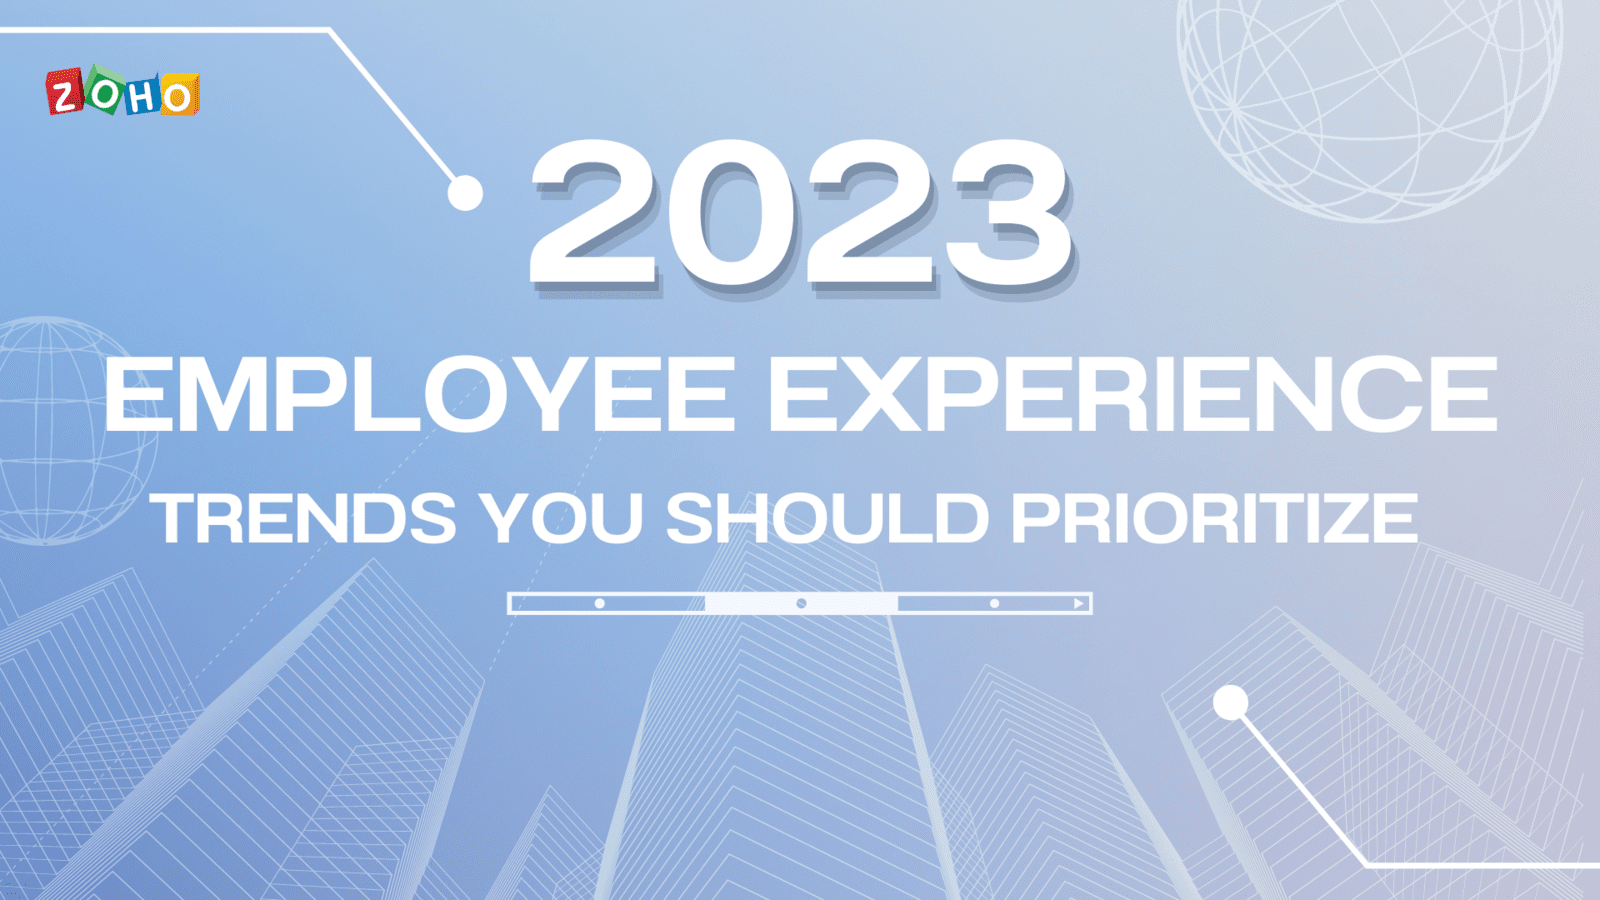 Employee Experience Trends You Should Prioritize In 2023